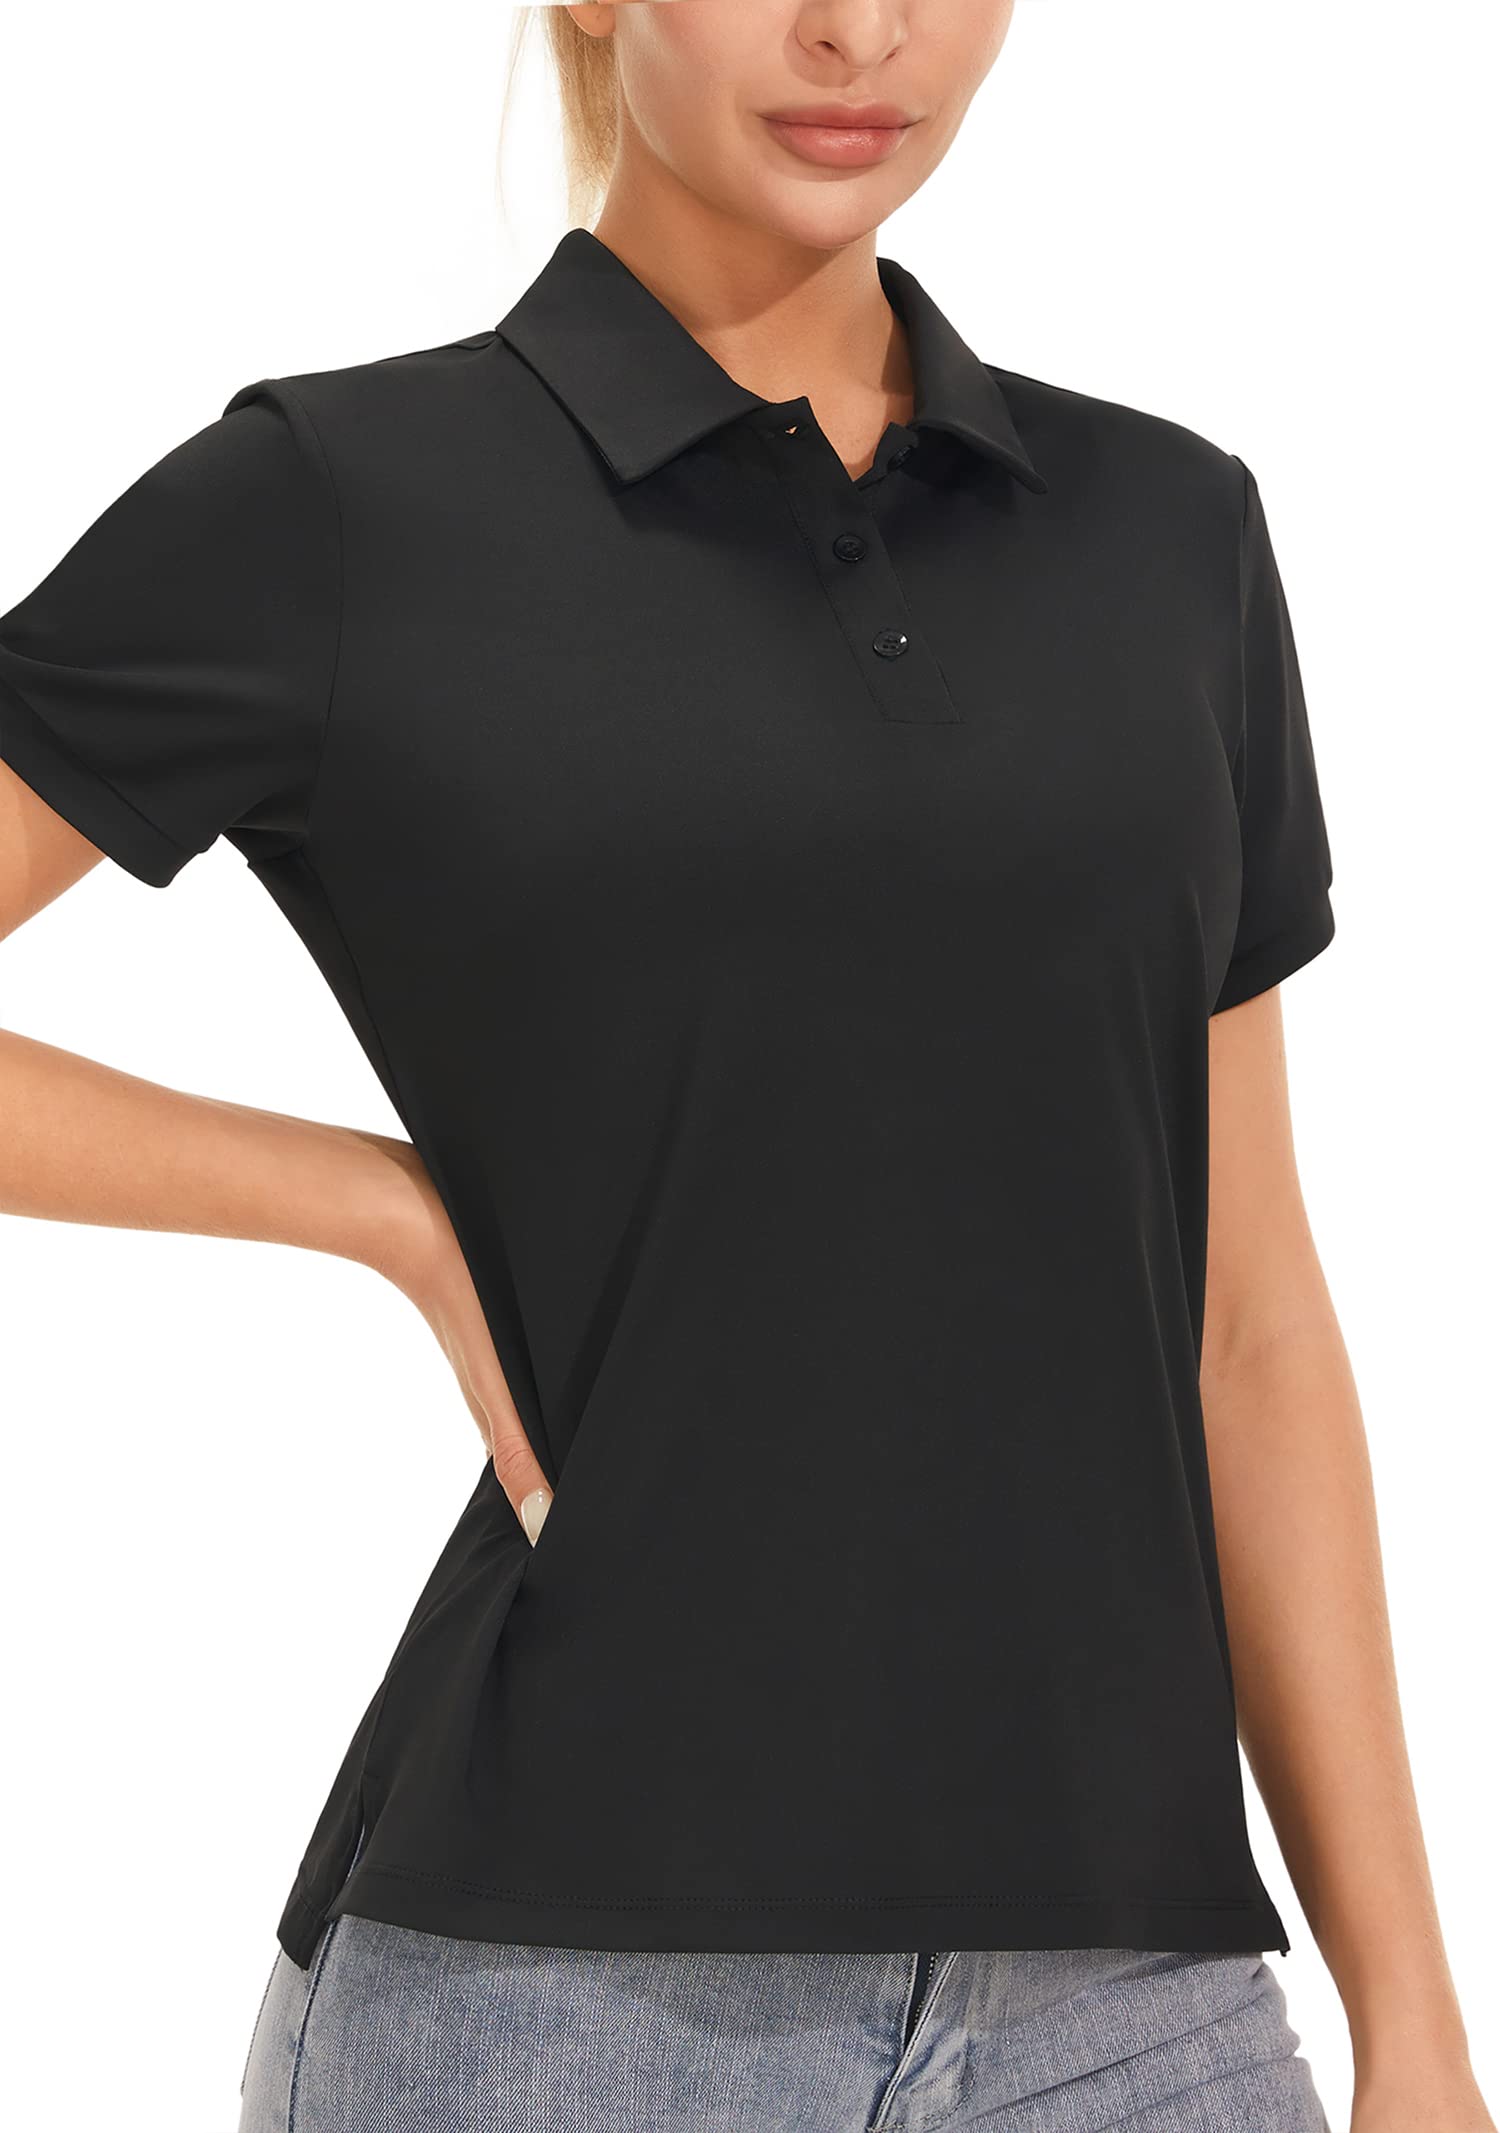 PERSIT Women's Golf Polo Shirts UPF 50+ Tennis Athletic T-Shirts Collared  Casual Work Tops Dry Fit Soft Cooling Shirt Large Black